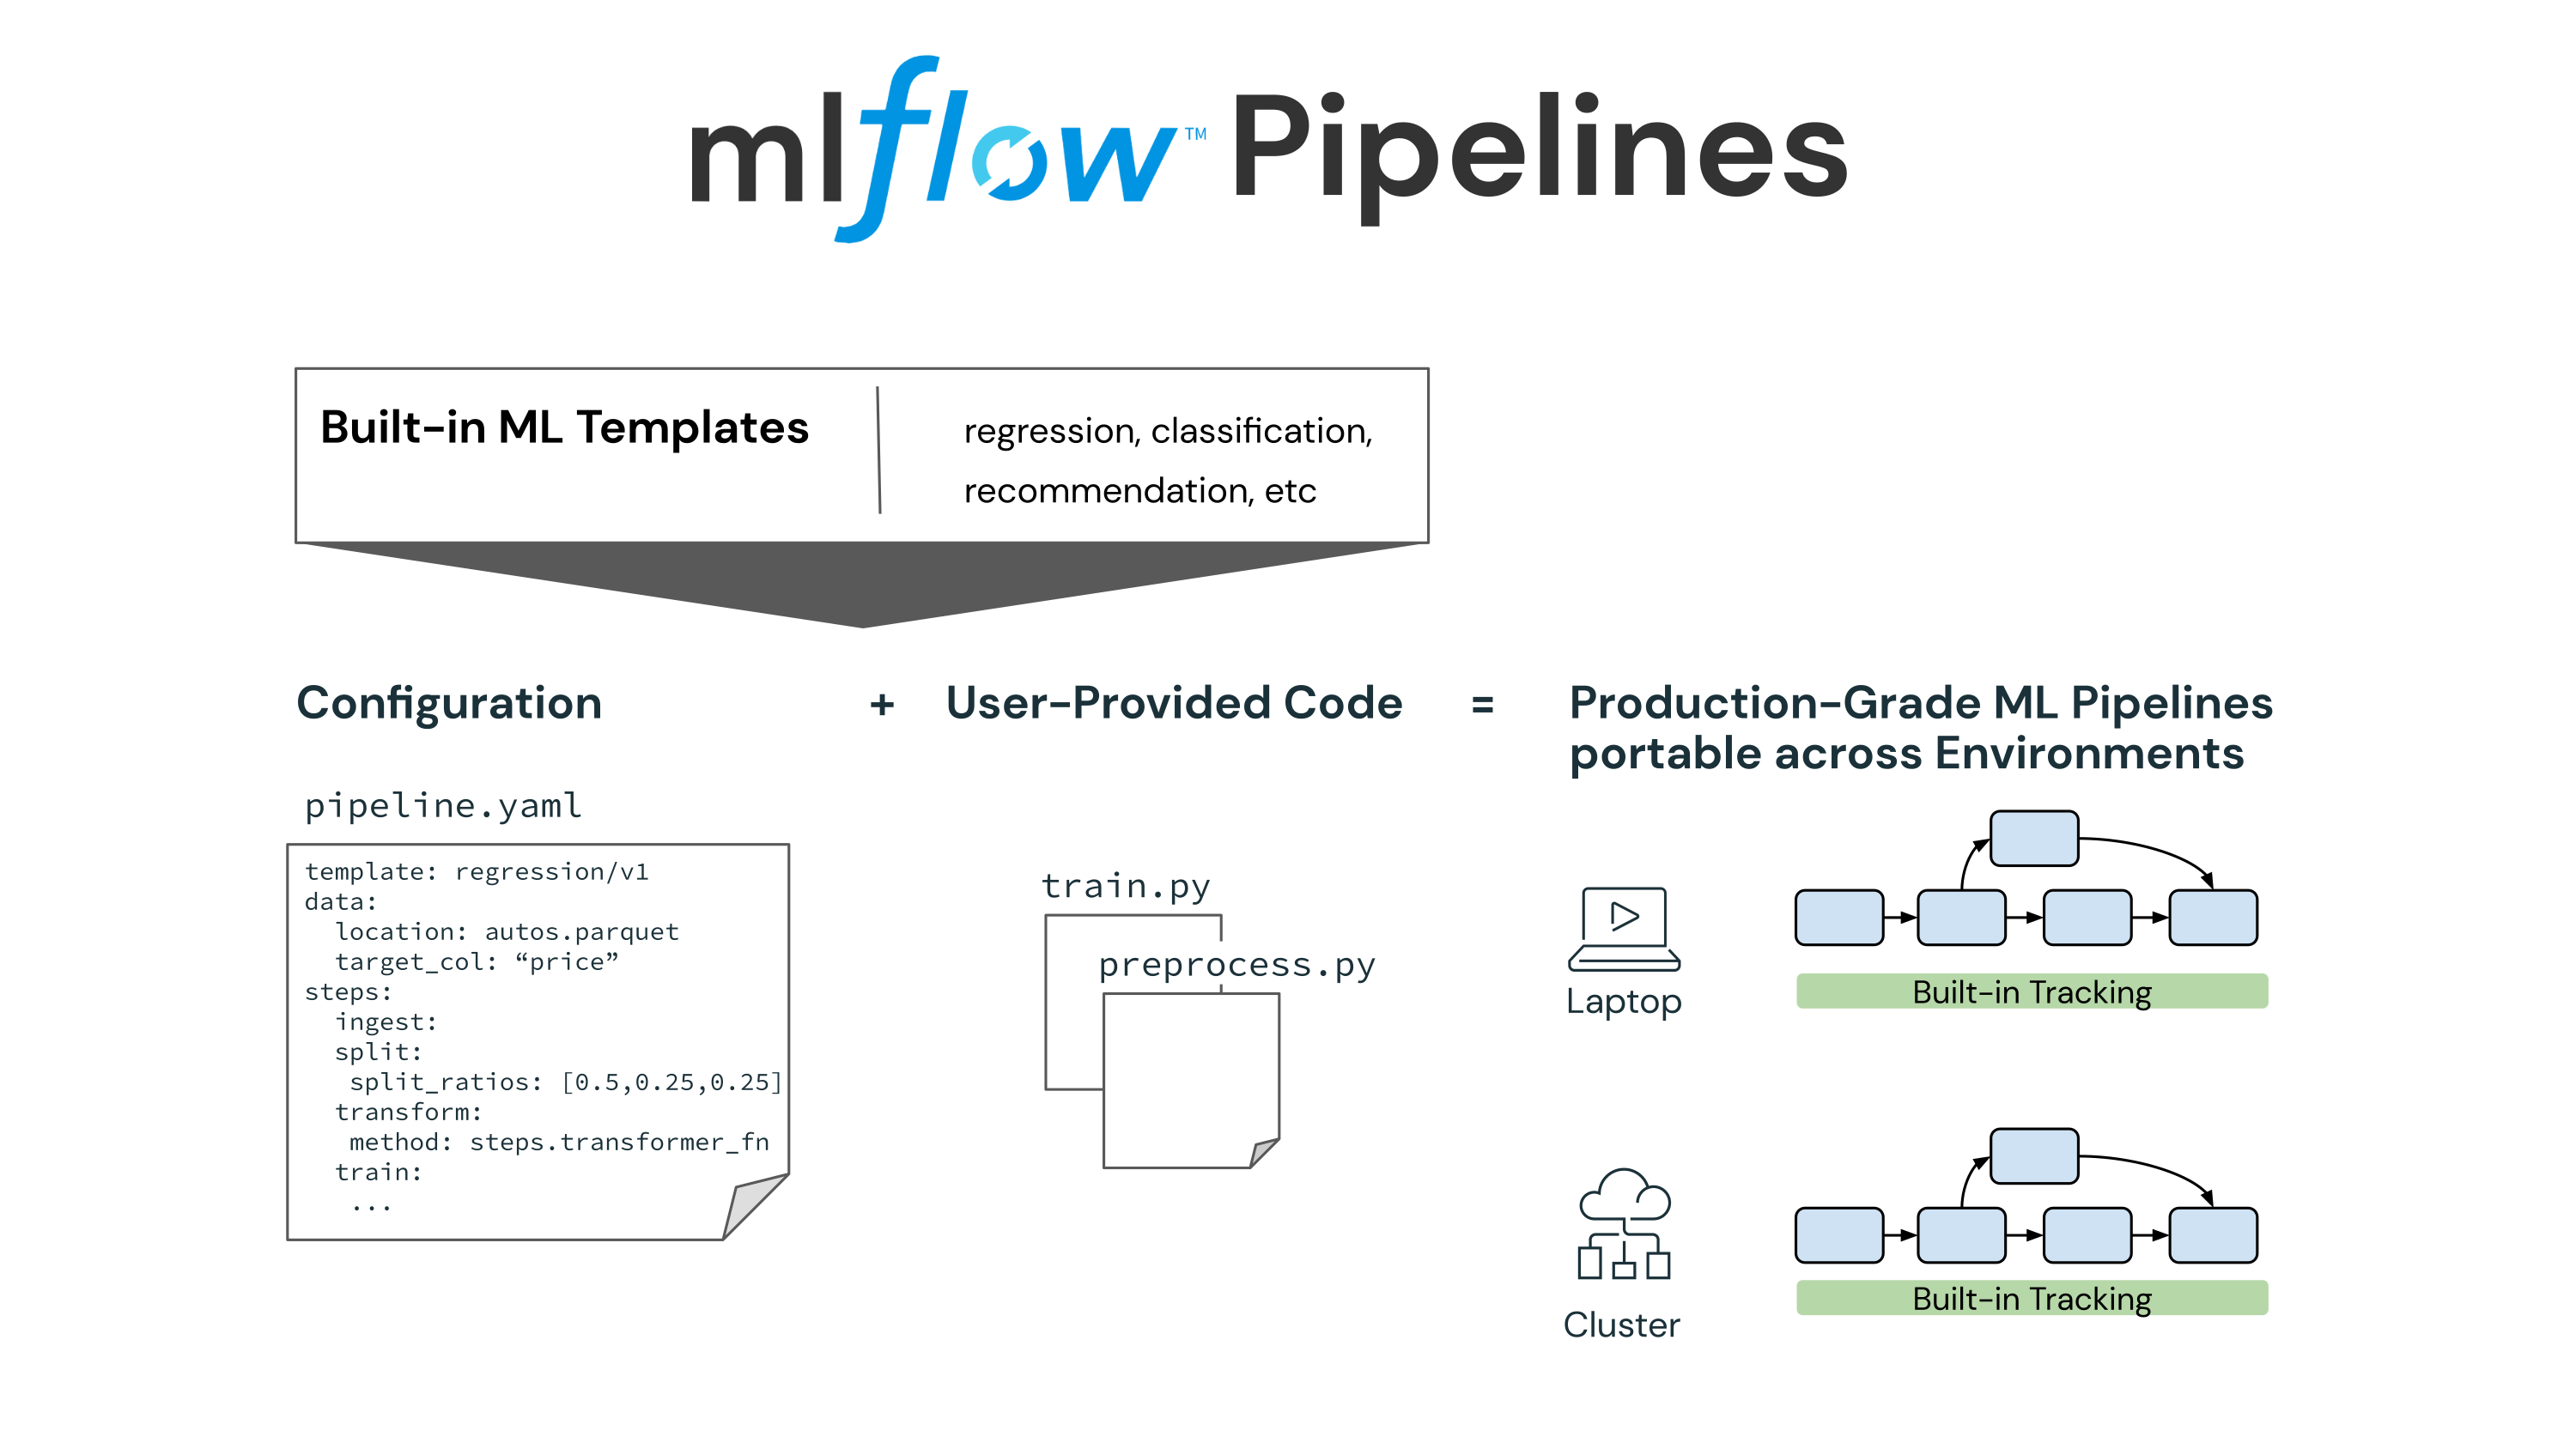 MLflow Pipeline enables Data Scientists to quickly and collaboratively create production-grade ML pipelines that can be deployed locally or in the cloud